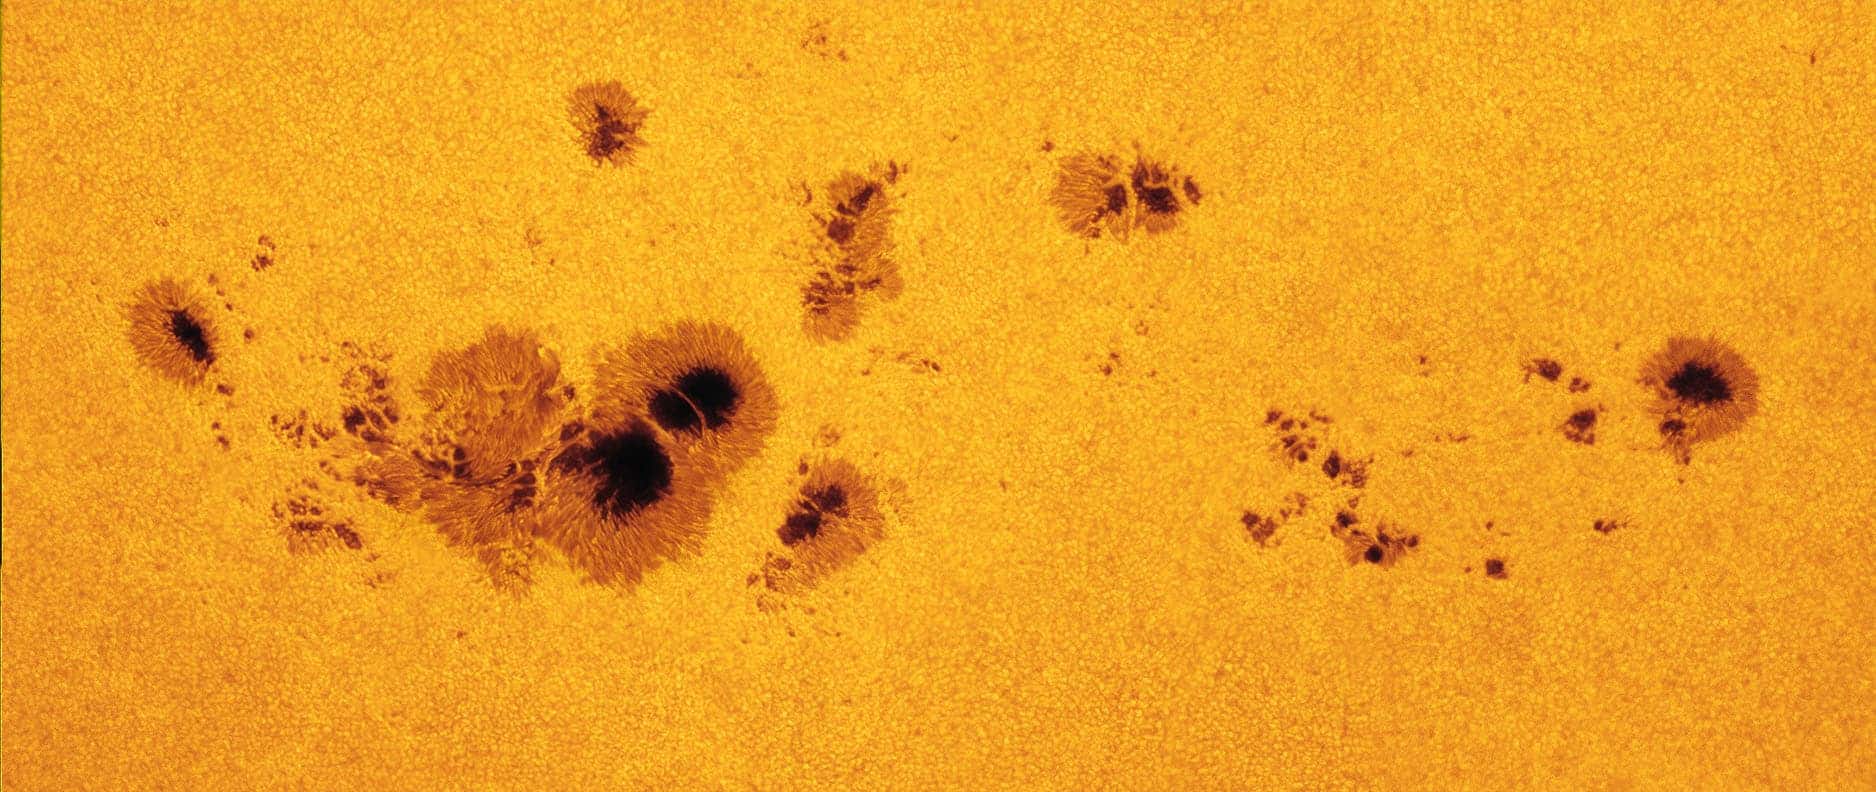 A group of sunspots. The big one in the lower-left part of the image stretches more than 11 Earths, or 87,000 miles across. Image by NASA.